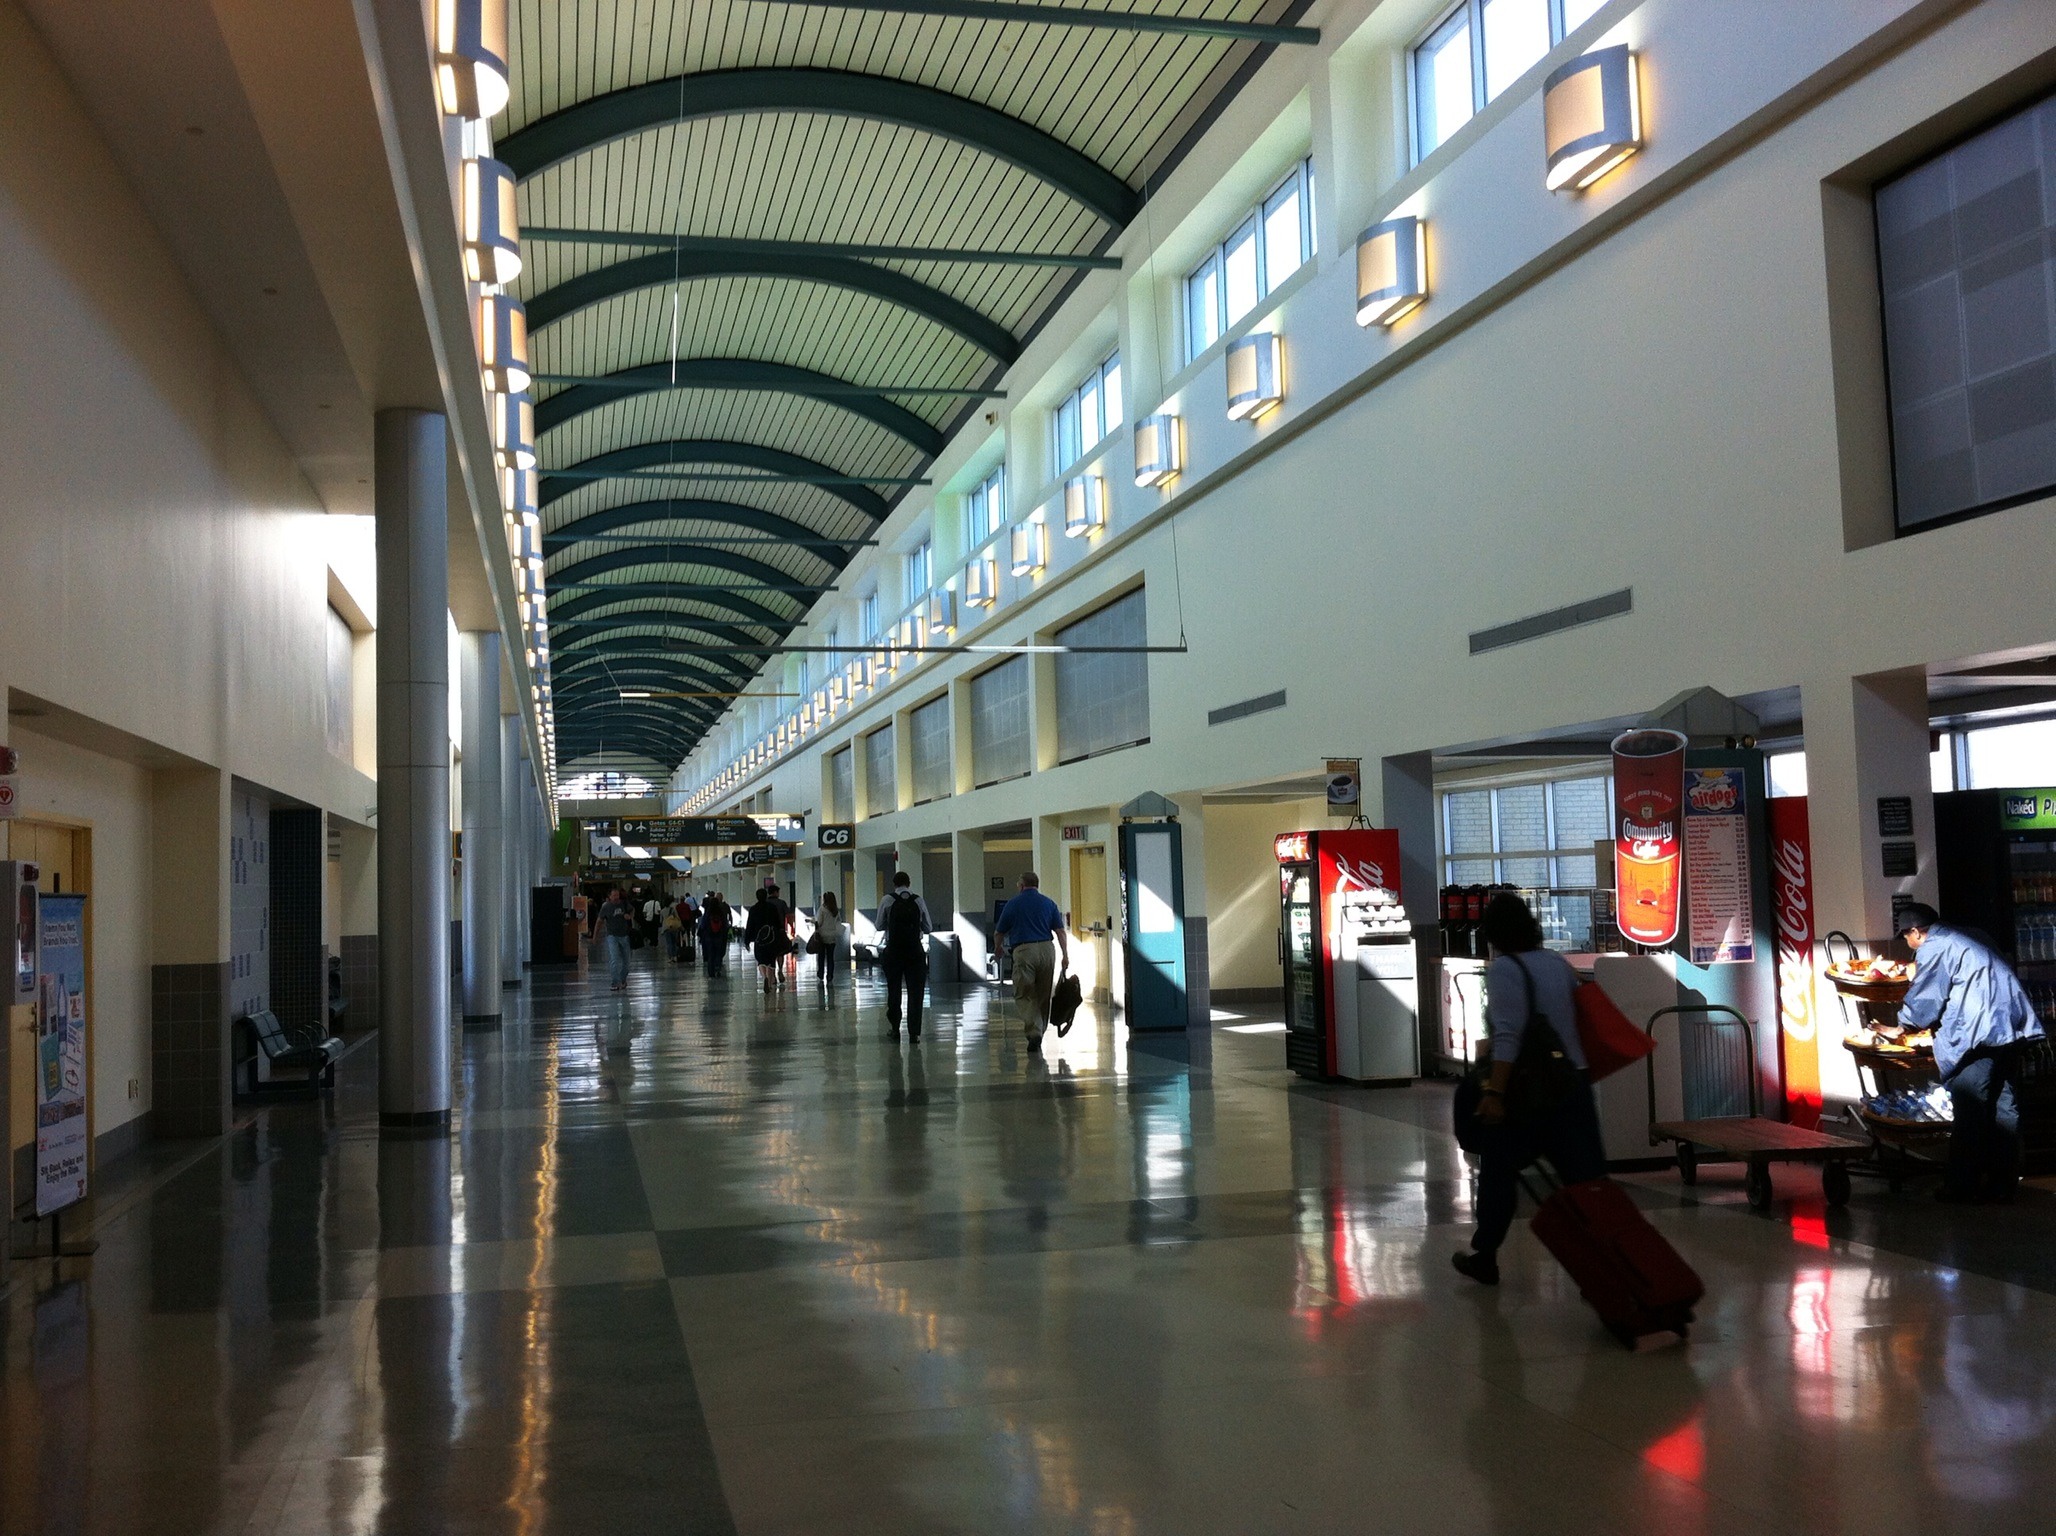 people are walking through the large terminal and walking along the walkway